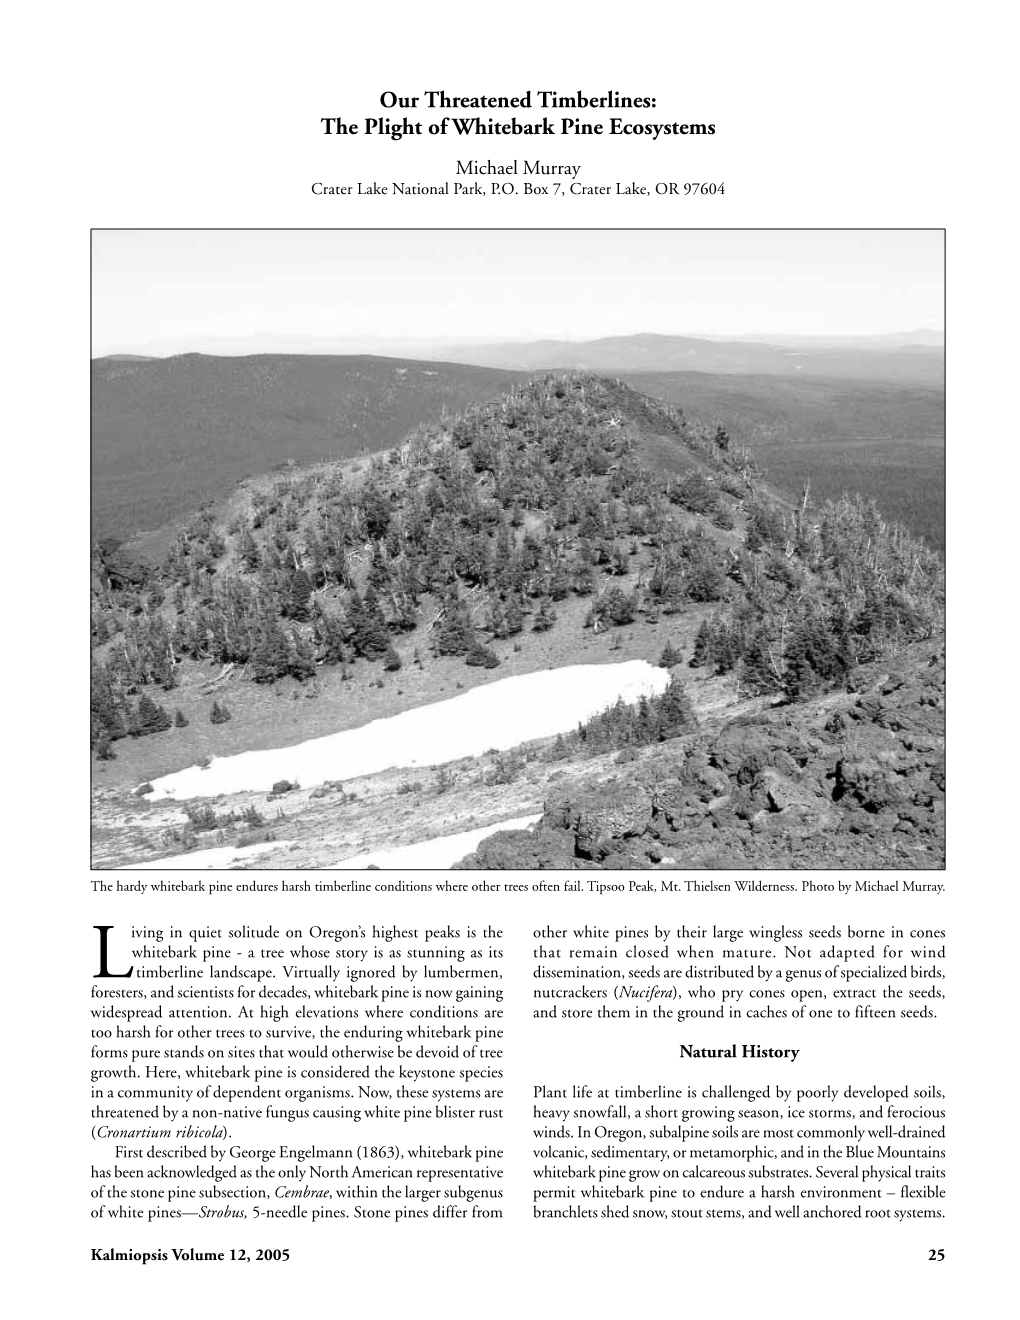 Our Threatened Timberlines: the Plight of Whitebark Pine Ecosystems Michael Murray Crater Lake National Park, P.O